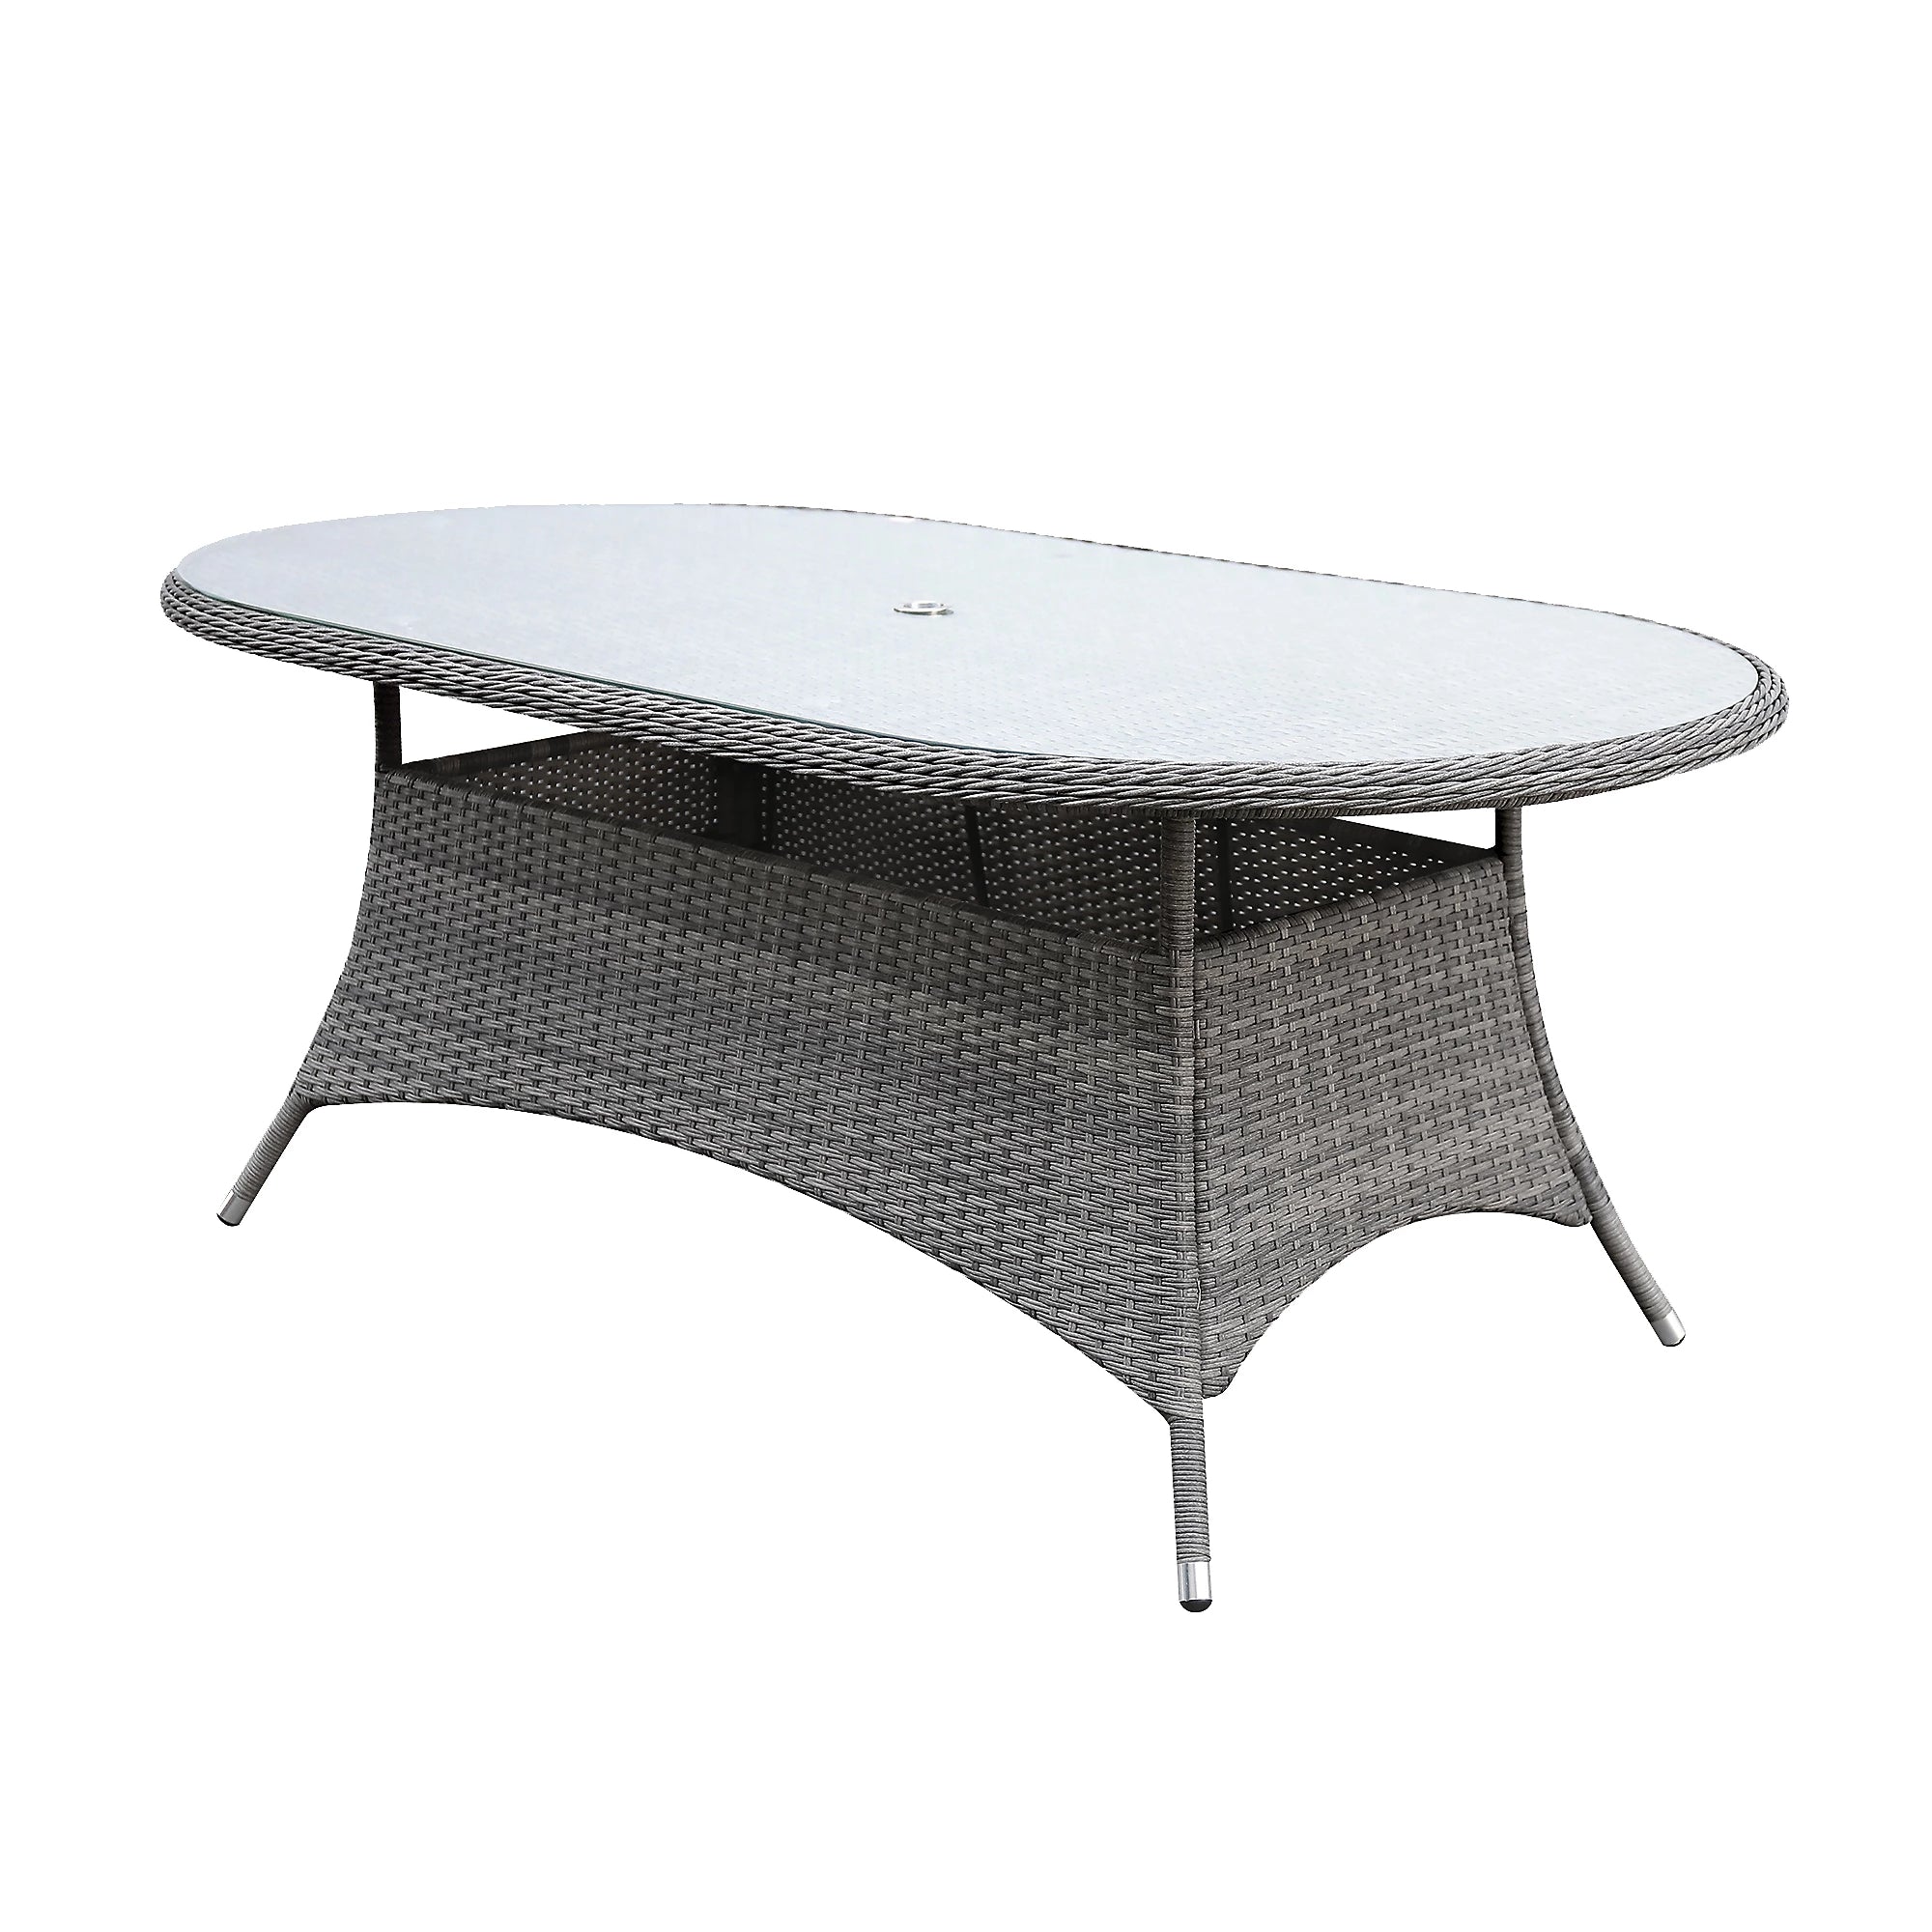 GoodHome Hamilton Rattan effect 6 seater Dining table 7314